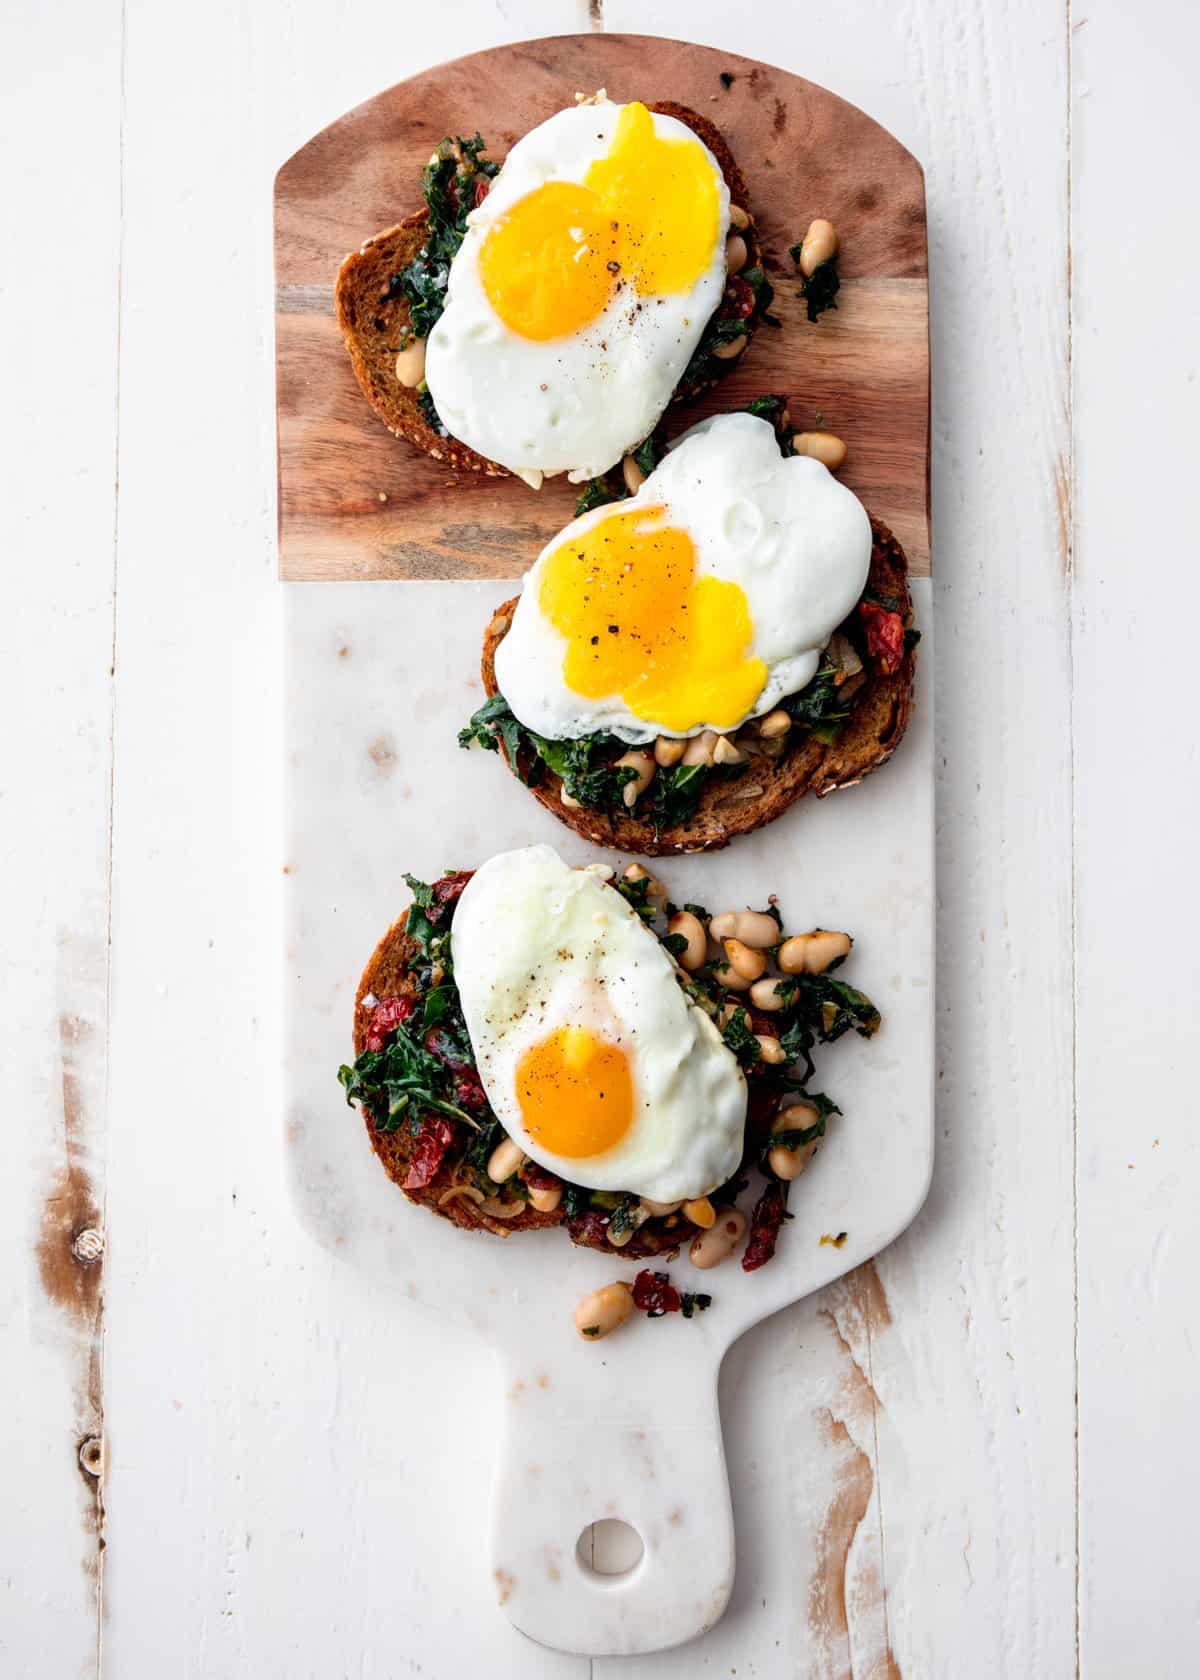 fried egg, white beans and kale on toasted bread on a cutting board